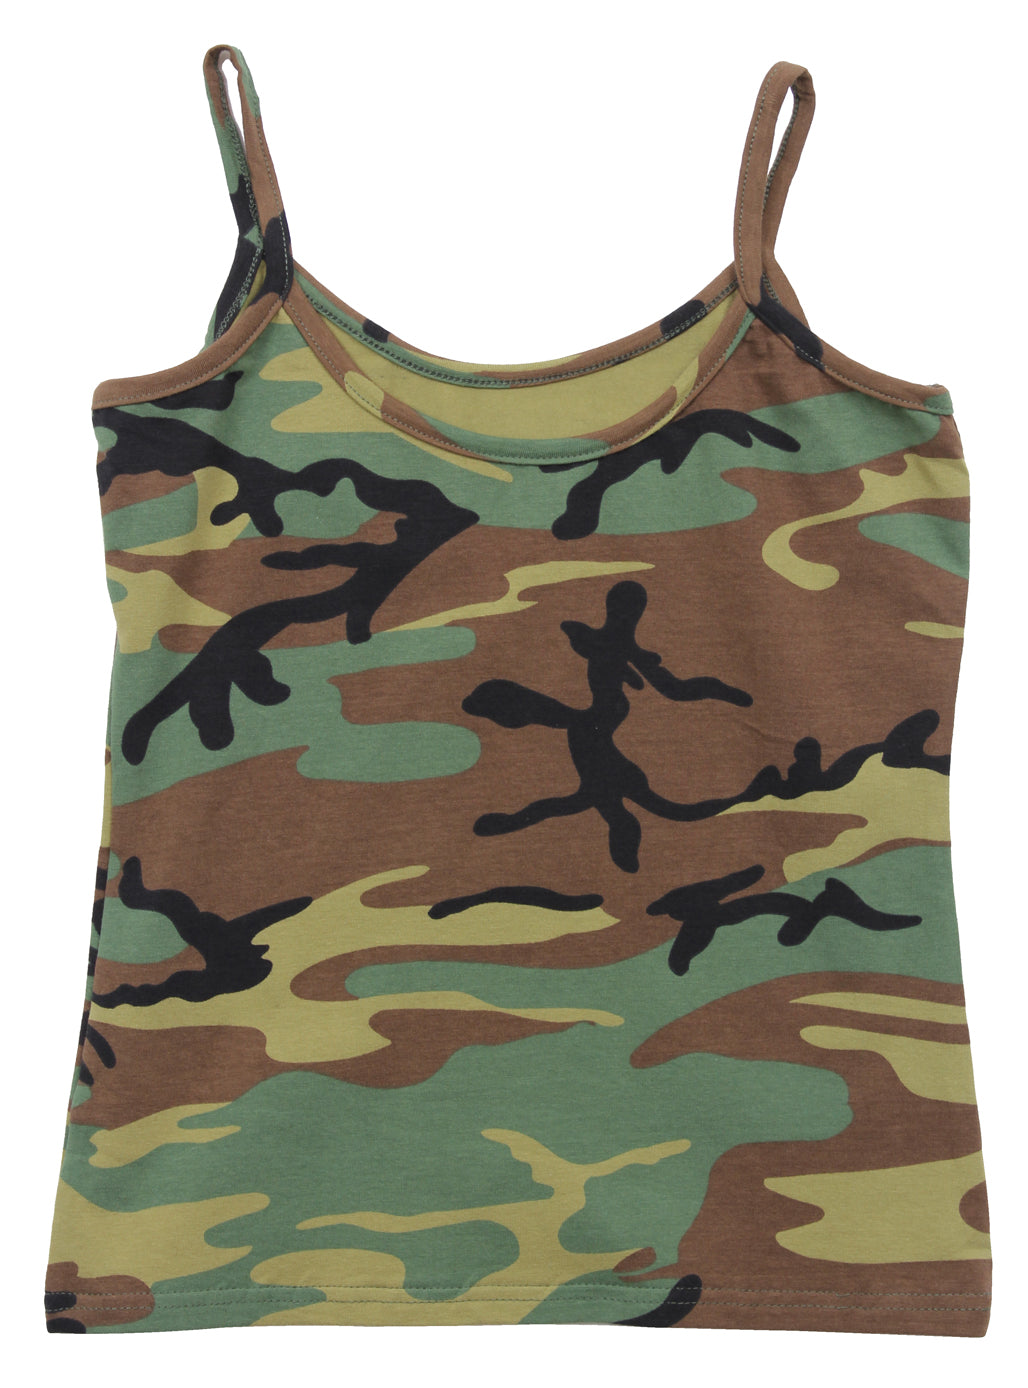 Woodland Camo "Booty Camp" Booty Shorts & Tank Top